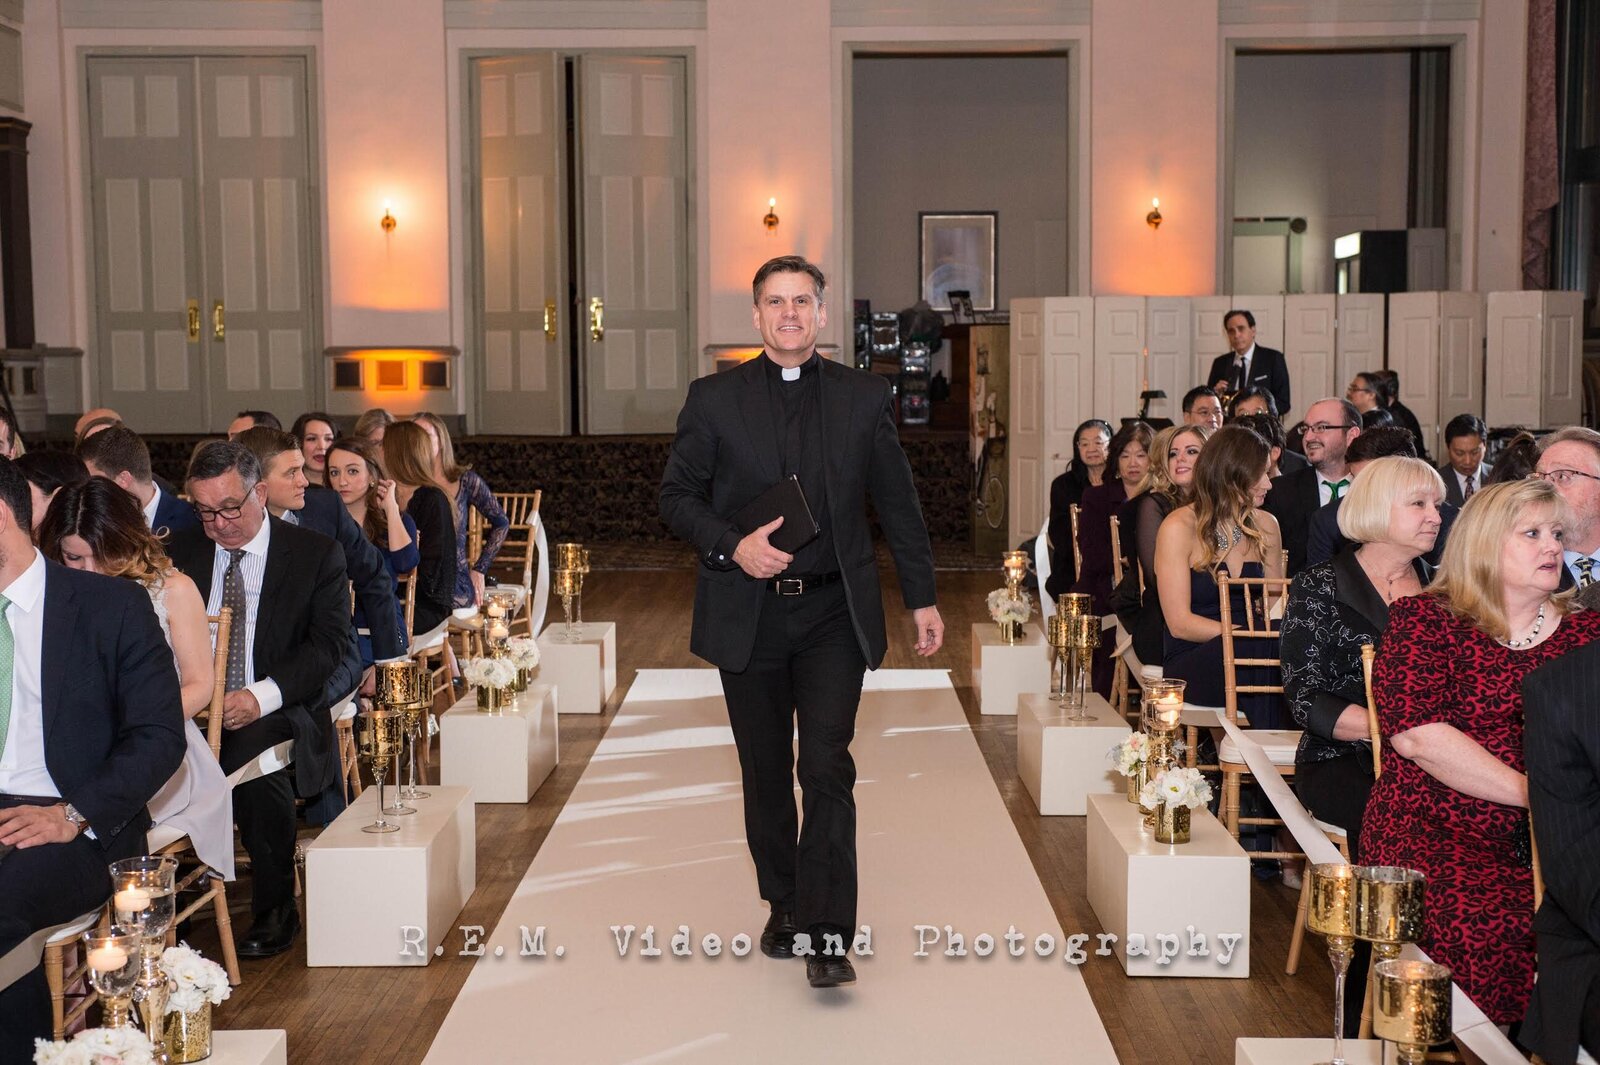 Wedding officiant walks down aisle to officiate a wedding